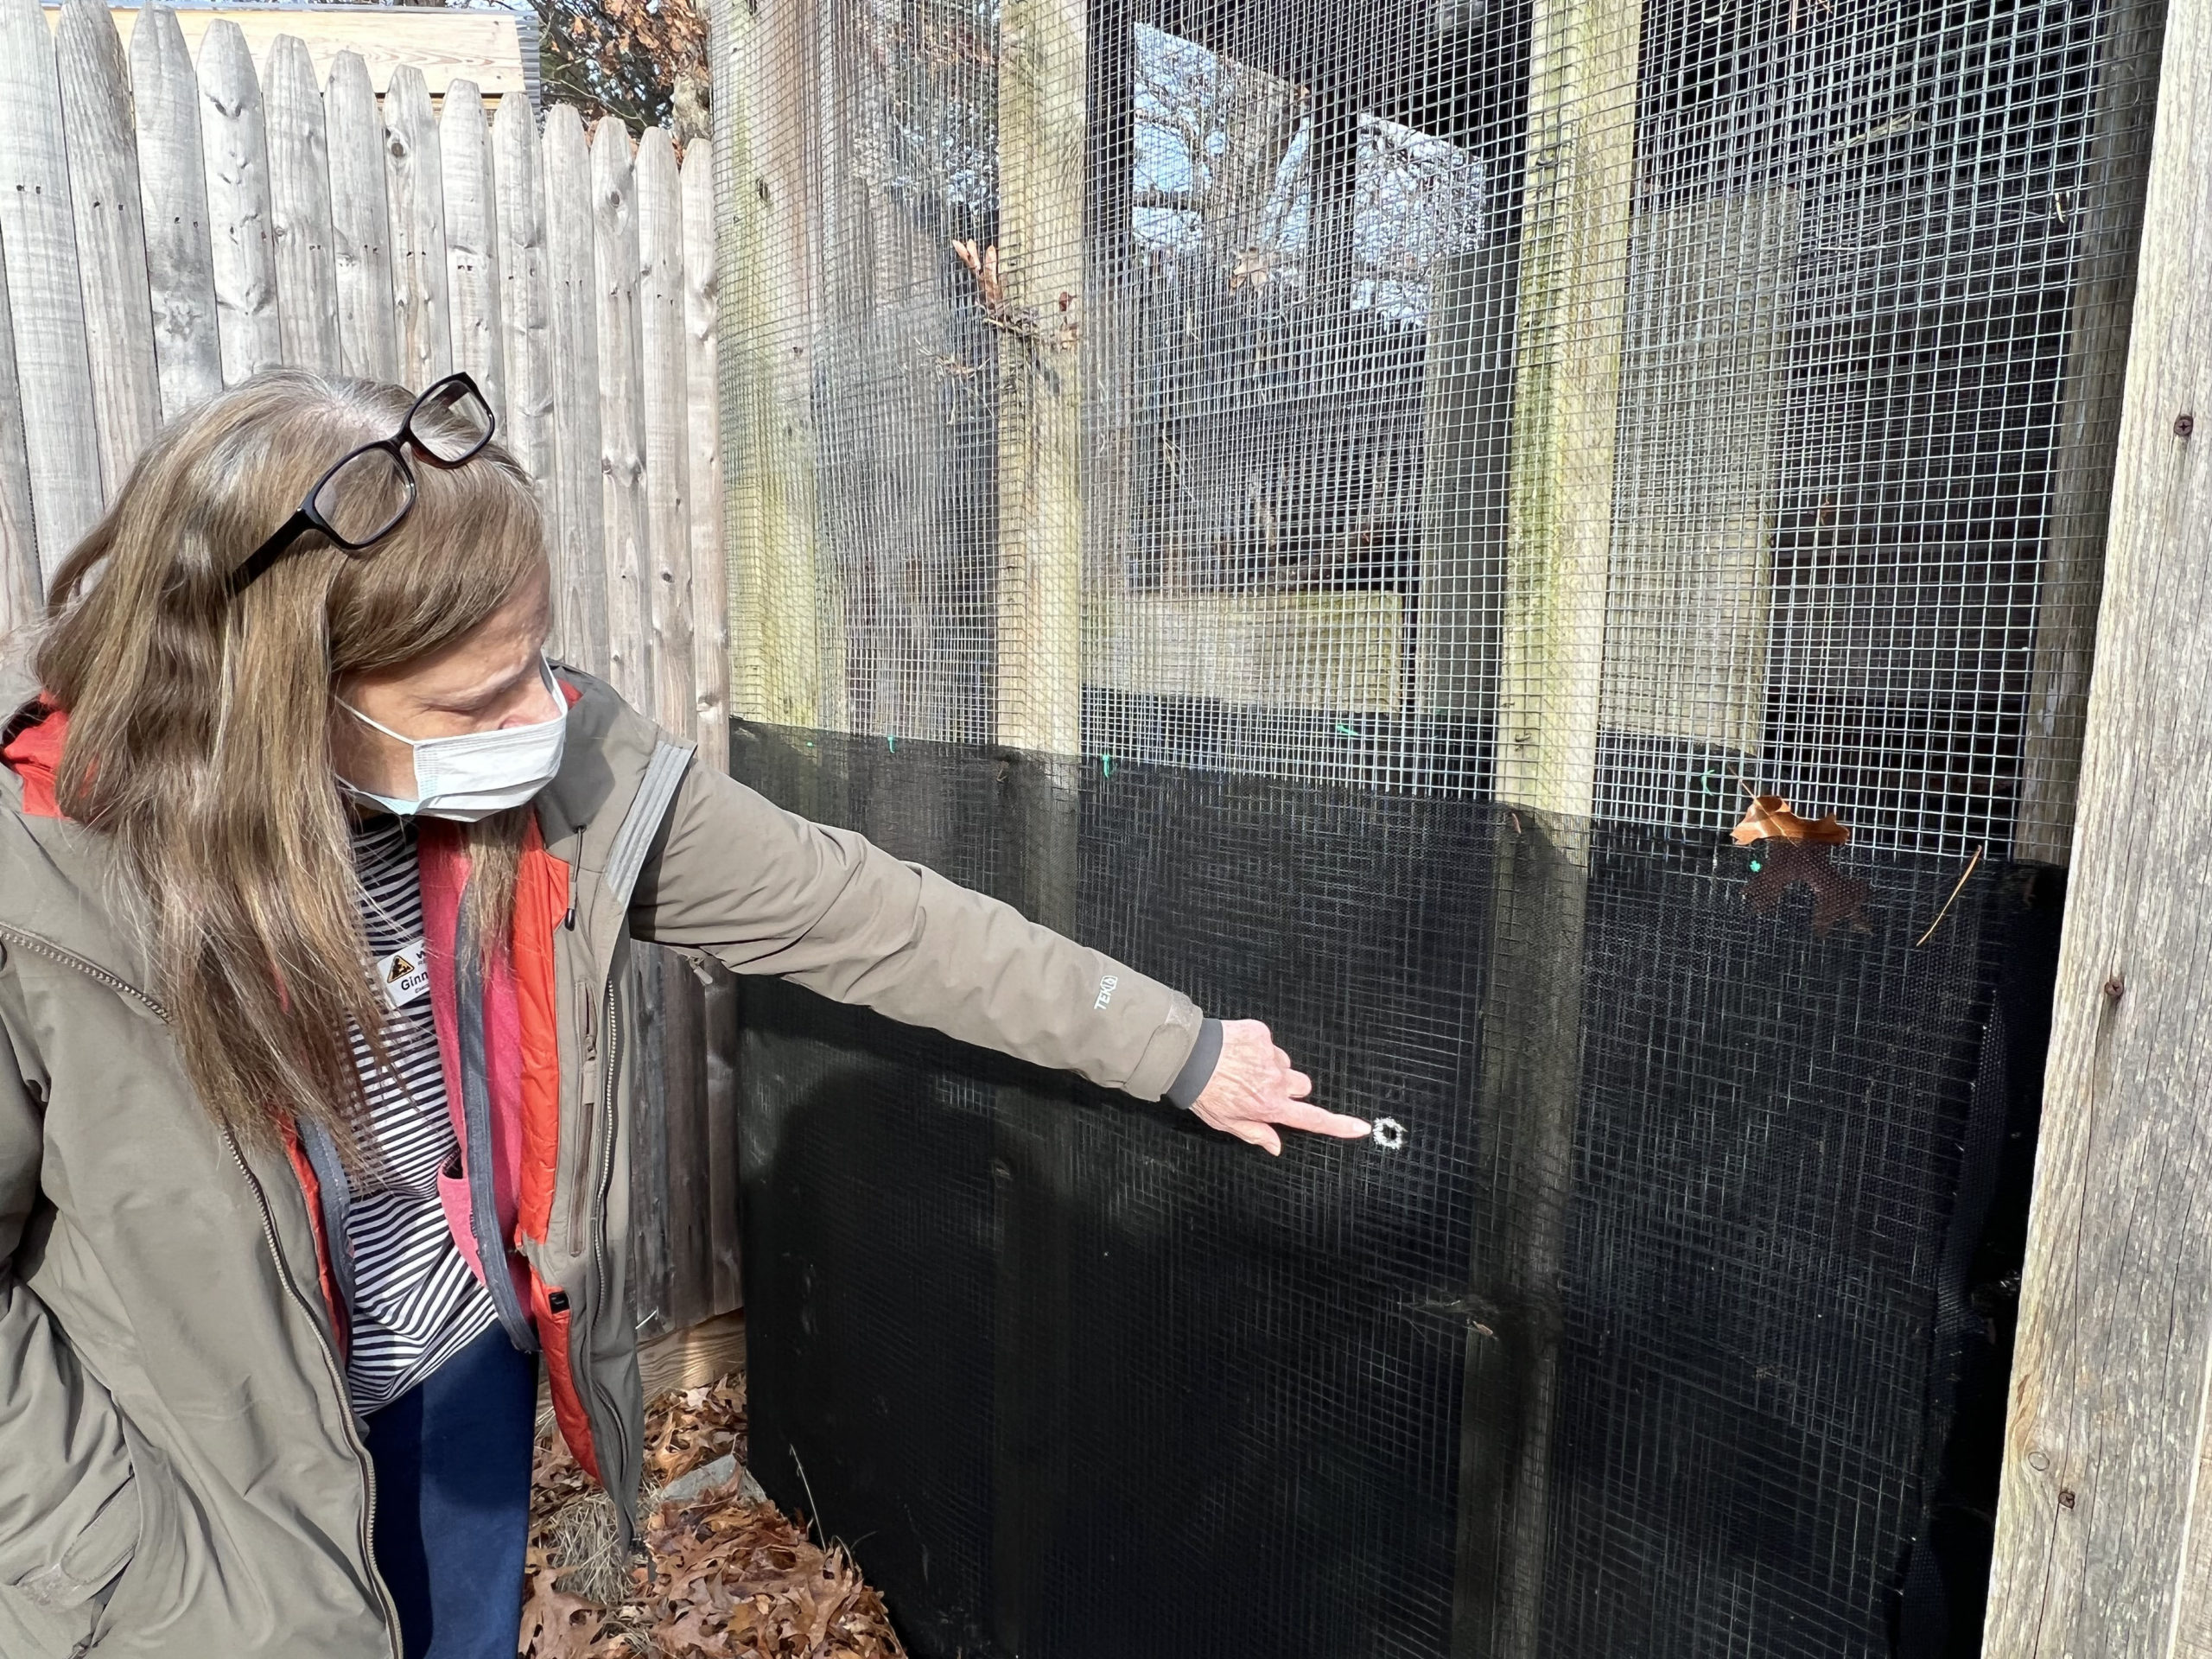 Evelyn Alexander Wildlife Rescue Center Executive Director Ginnie Frati points to the bullet holes that passed through one of the animal enclosures.    DANA SHAW